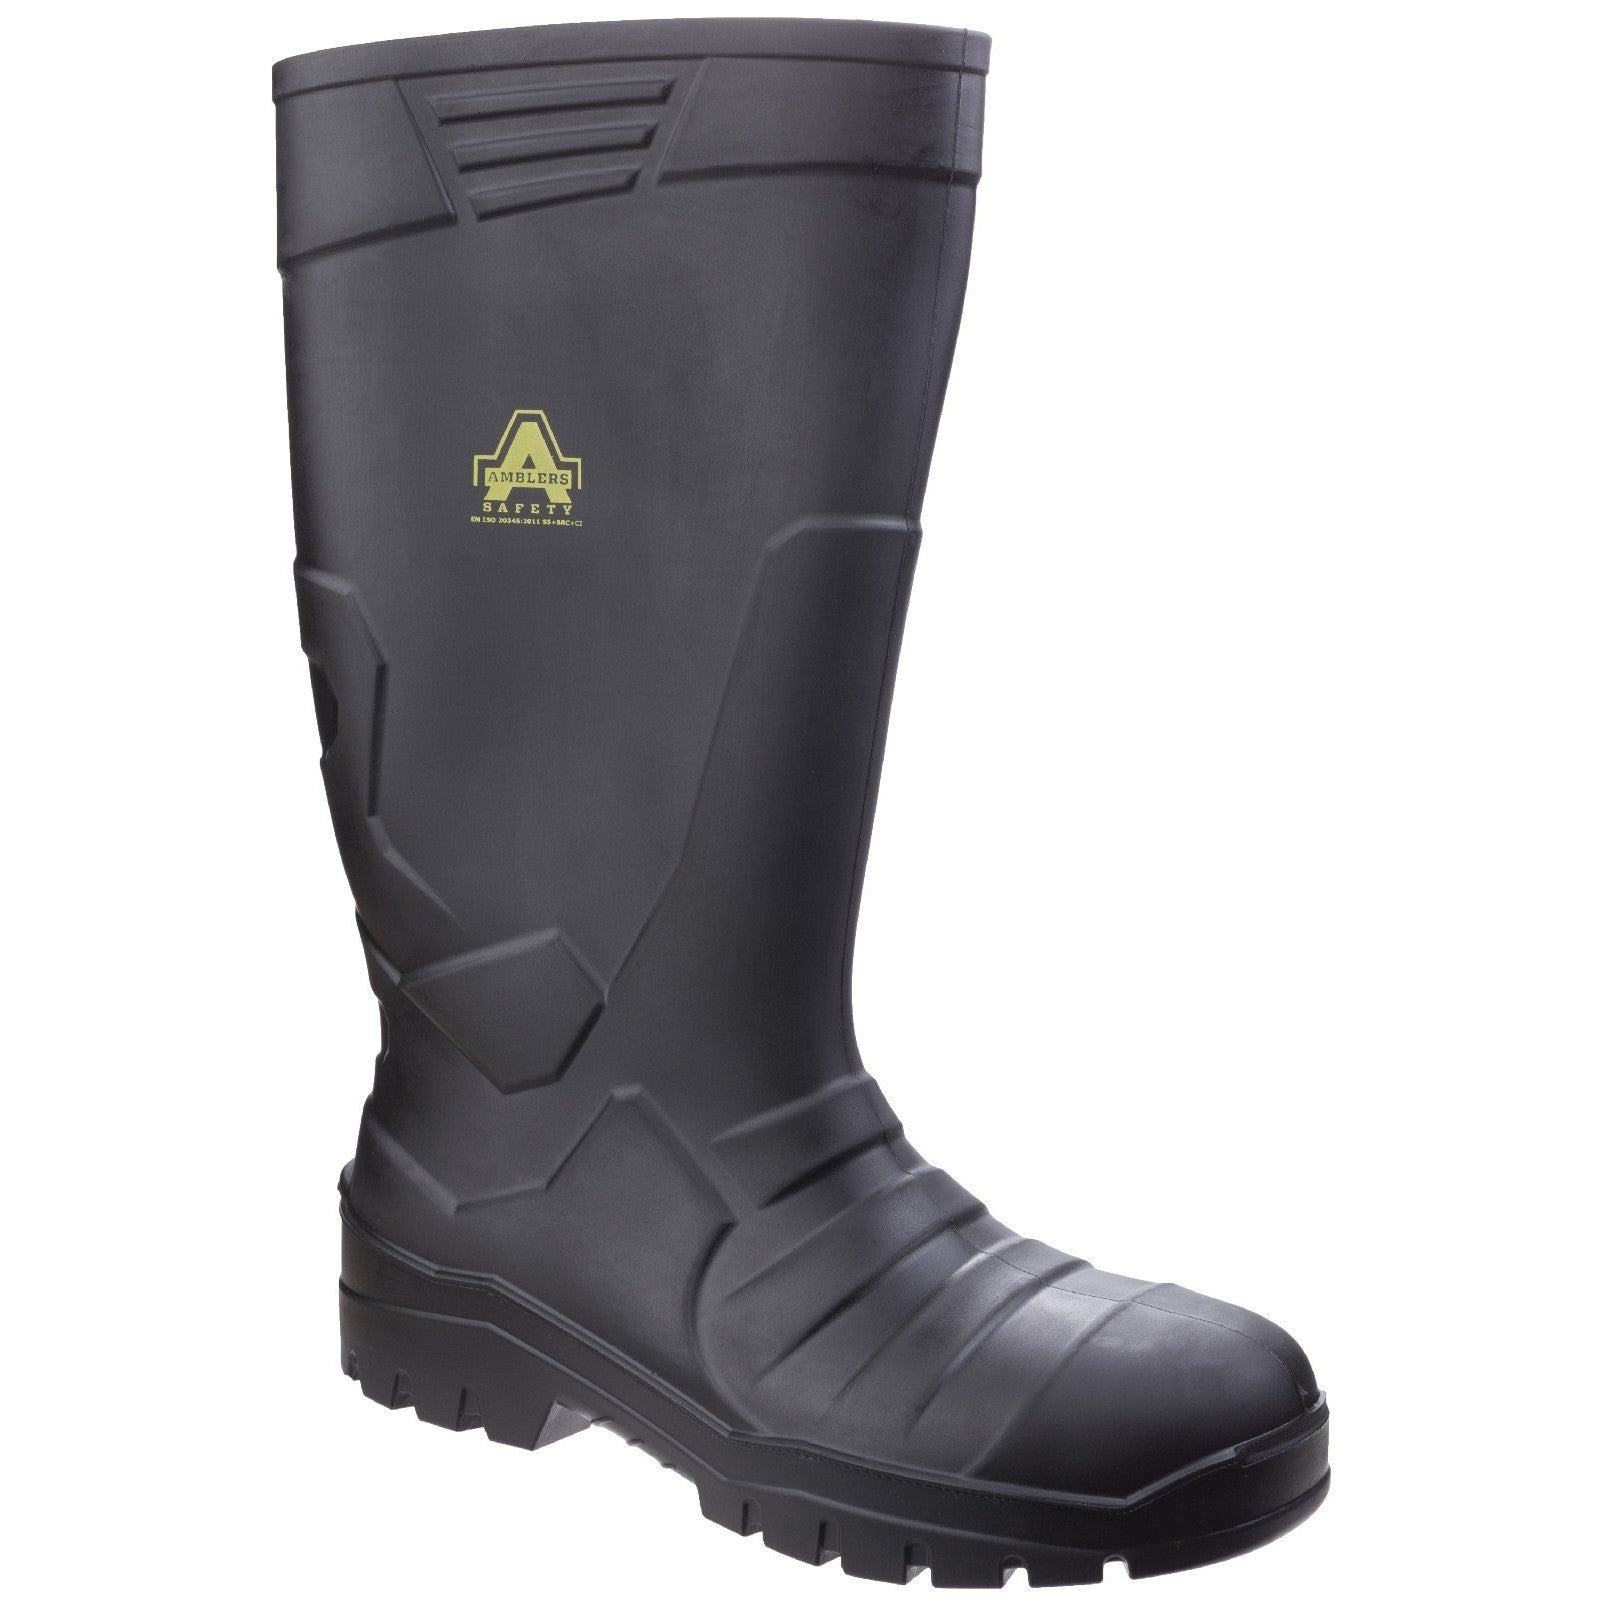 Amblers Safety AS1006 Full Safety Wellington Boots